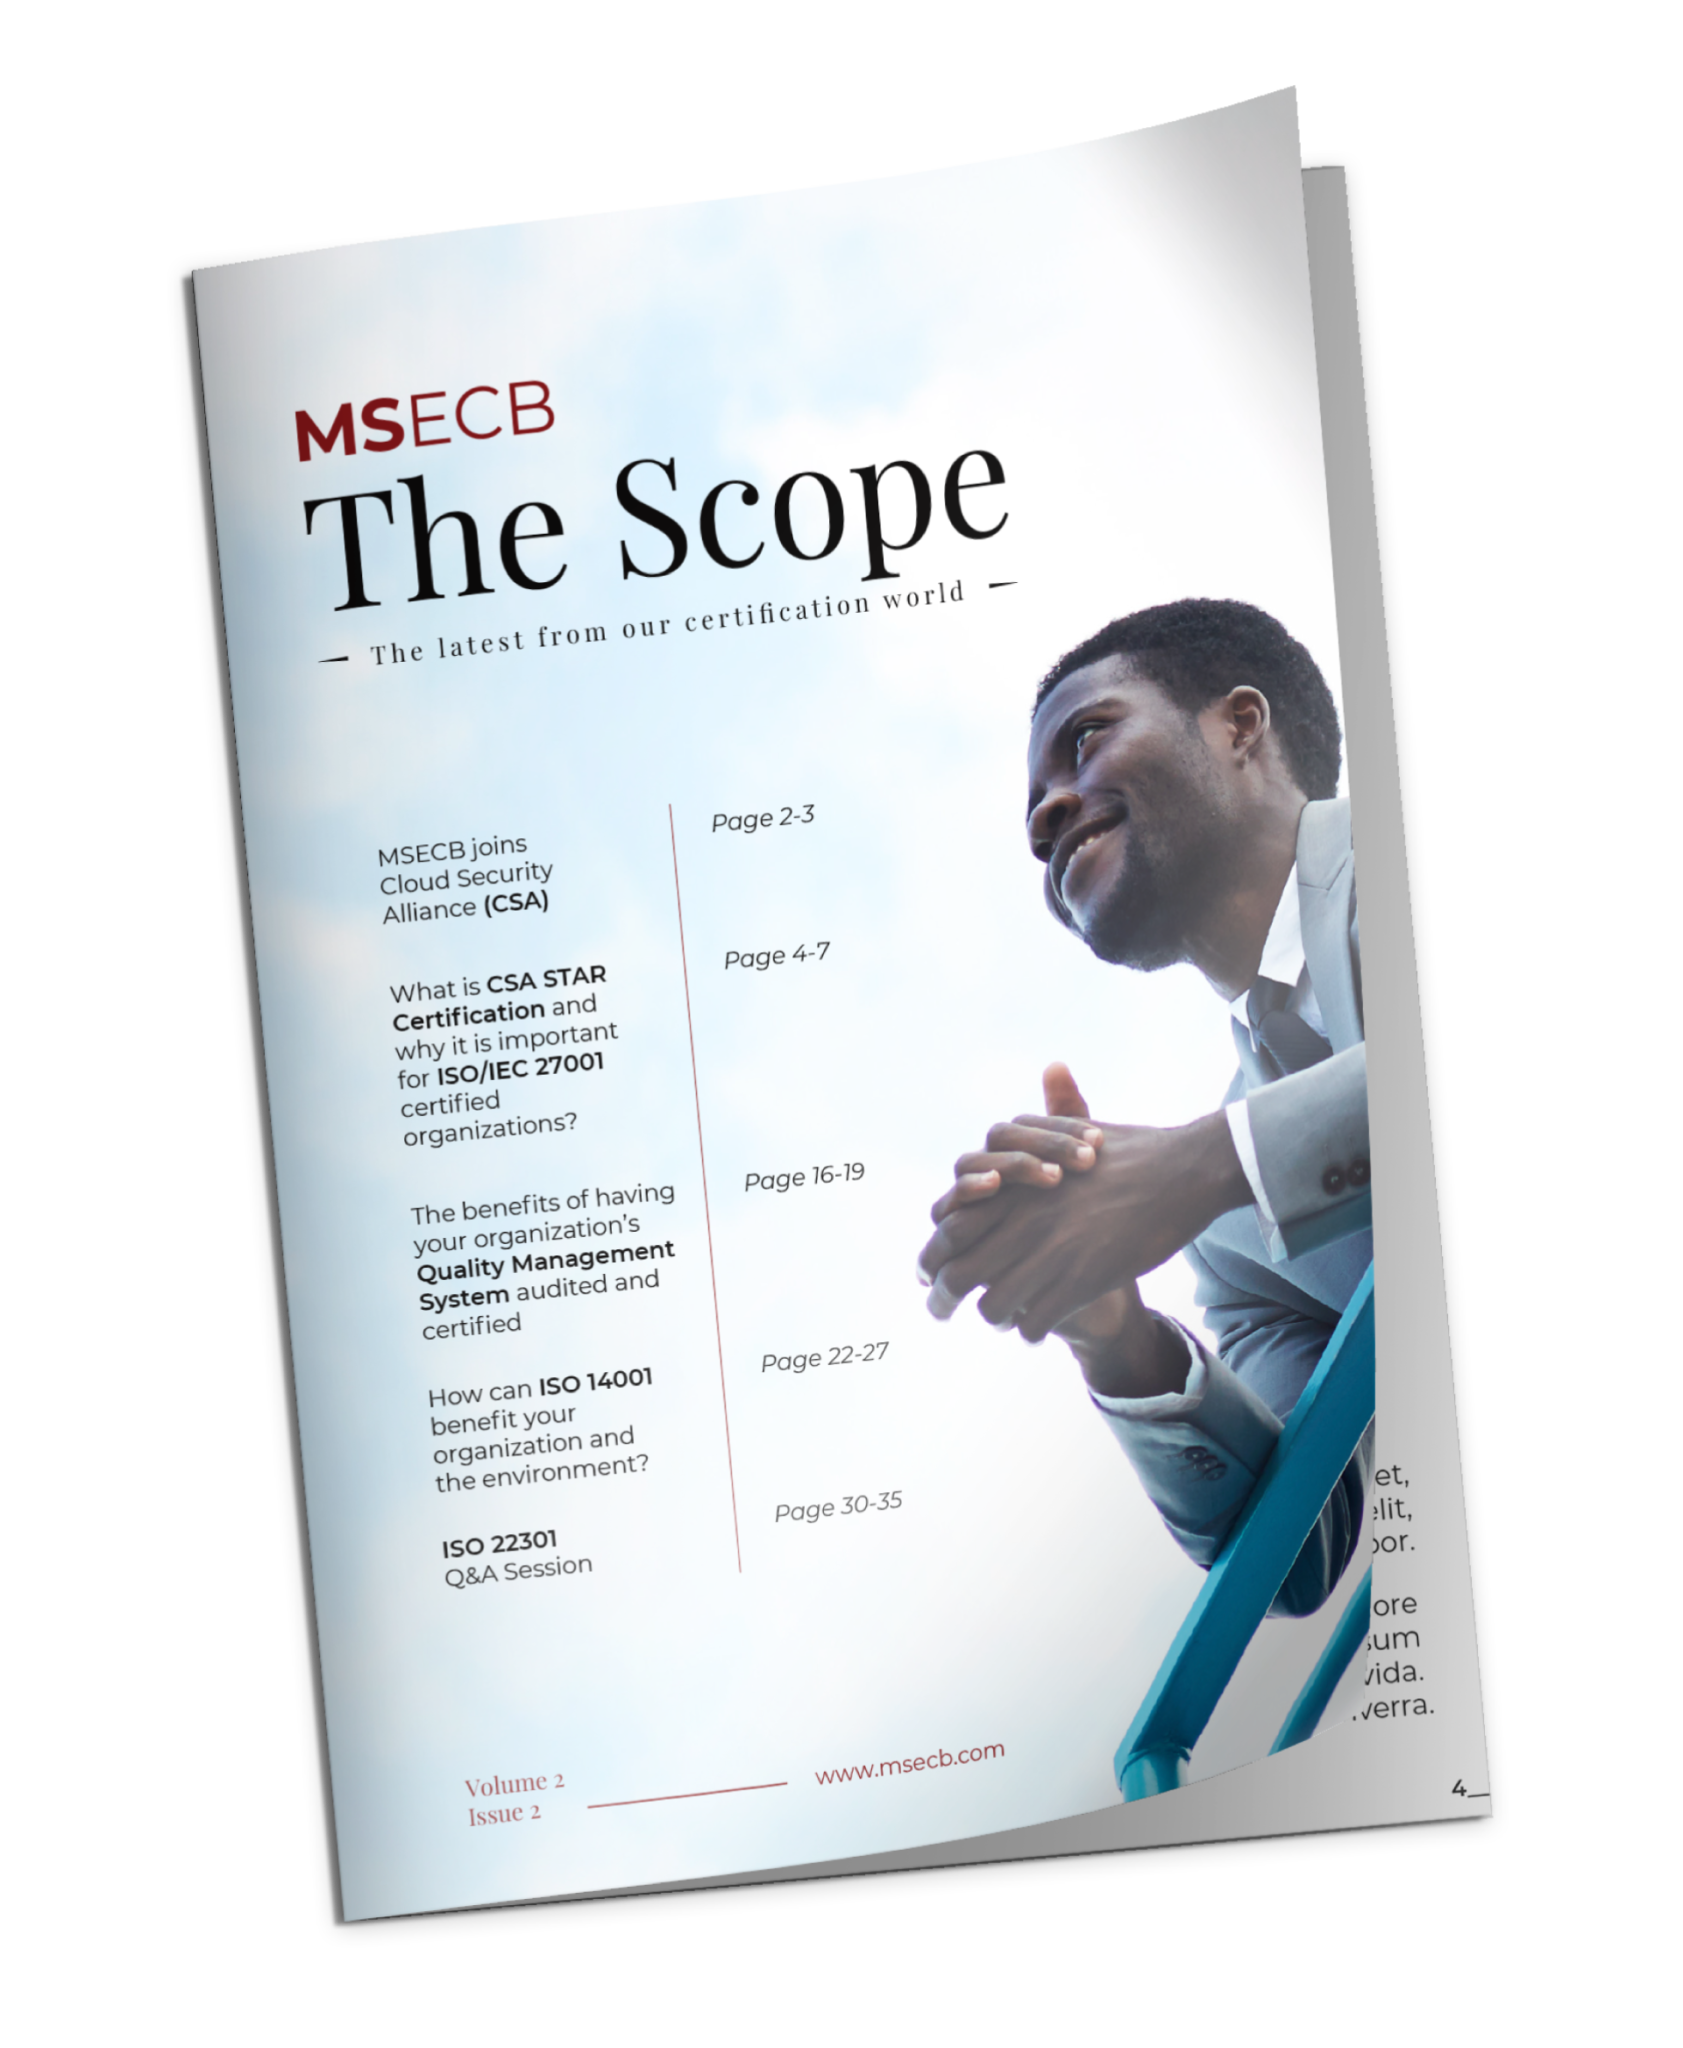 The Scope Newsletter, corporate membership with the Cloud Security Alliance (CSA) and the most frequently asked questions about ISO 22301